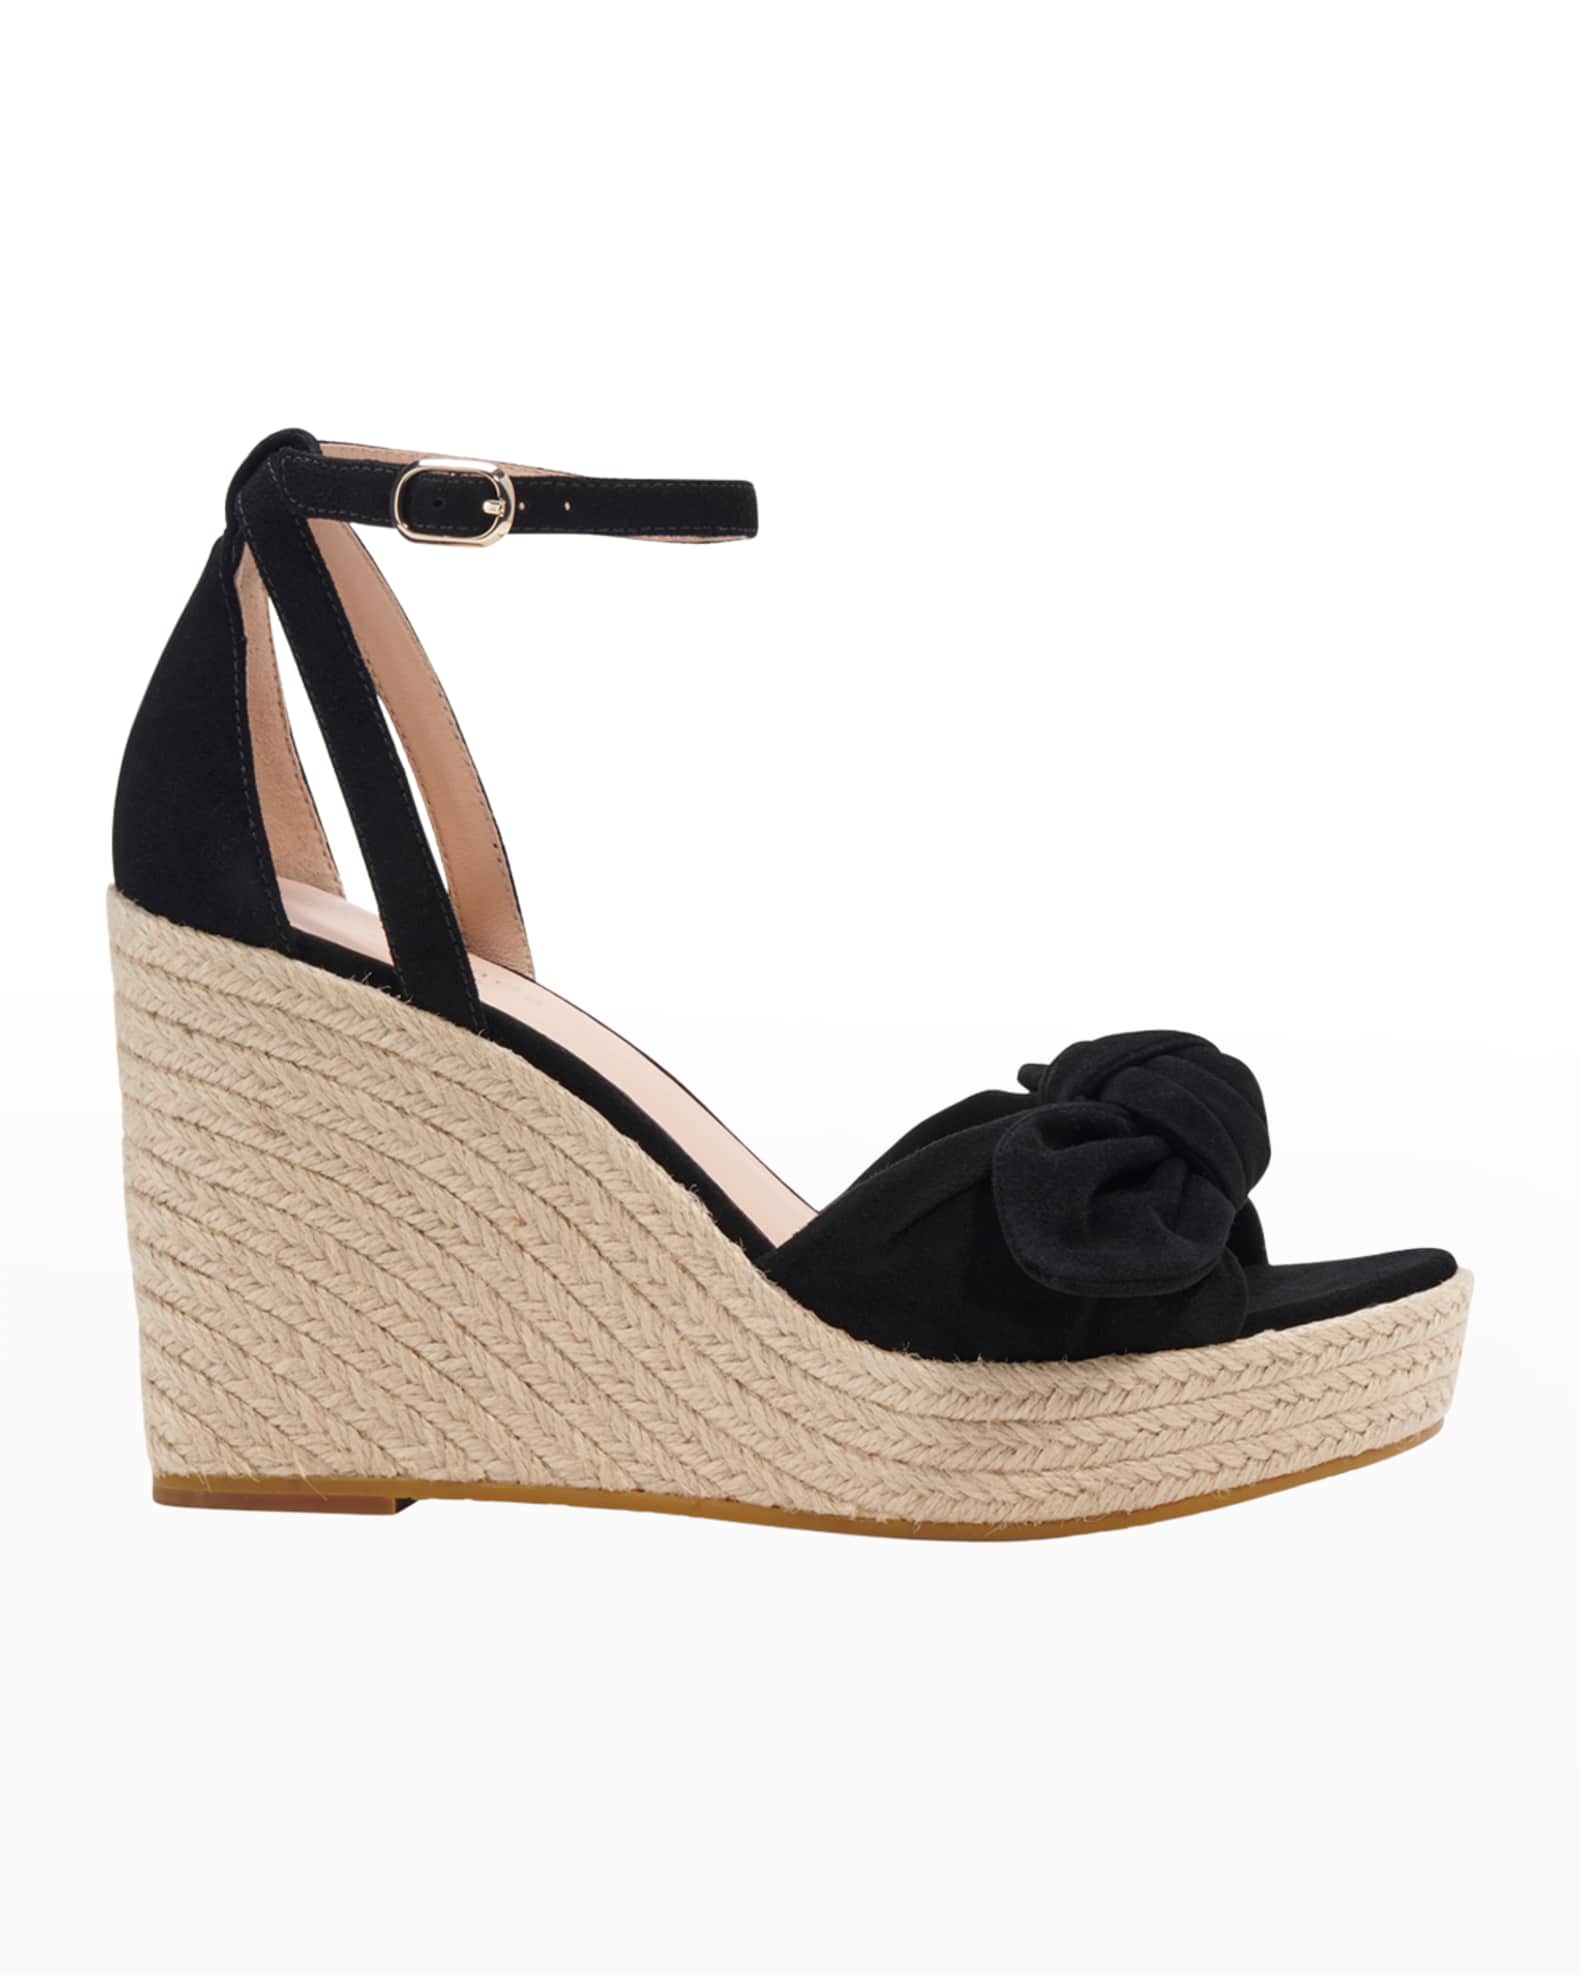 kate spade new york tianna suede bow wedge espadrille sandals | Neiman  Marcus